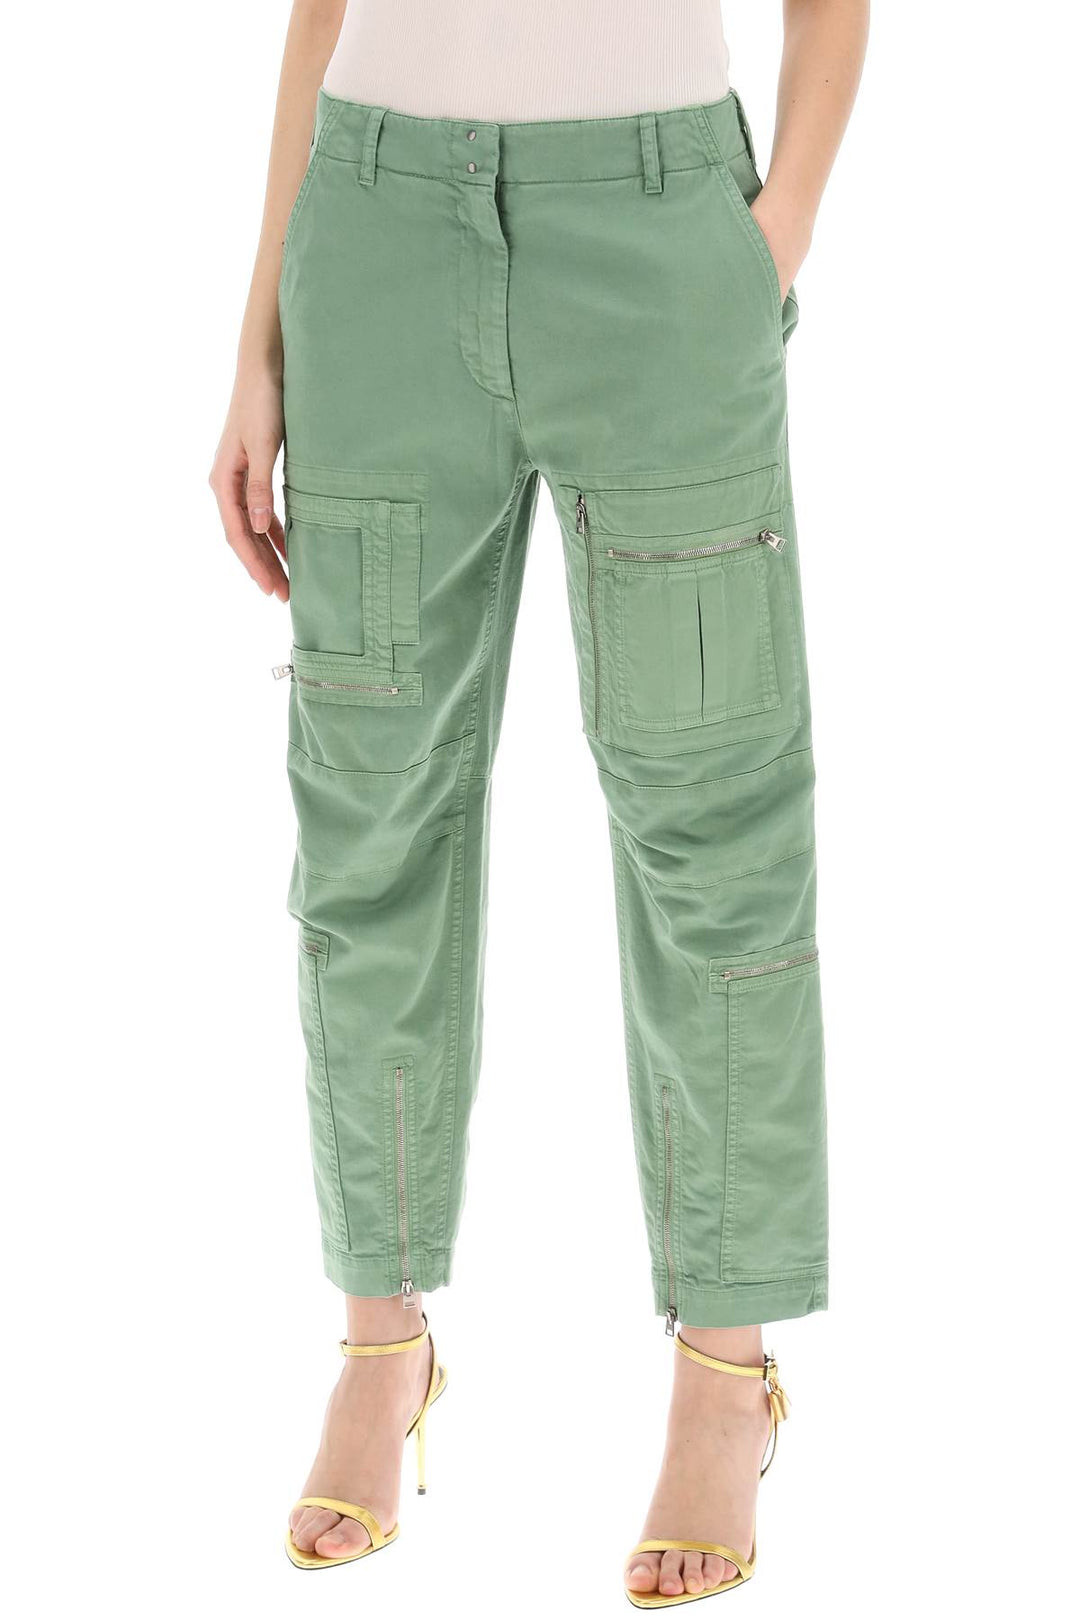 Tom Ford Tapered Cargo Pants   Verde